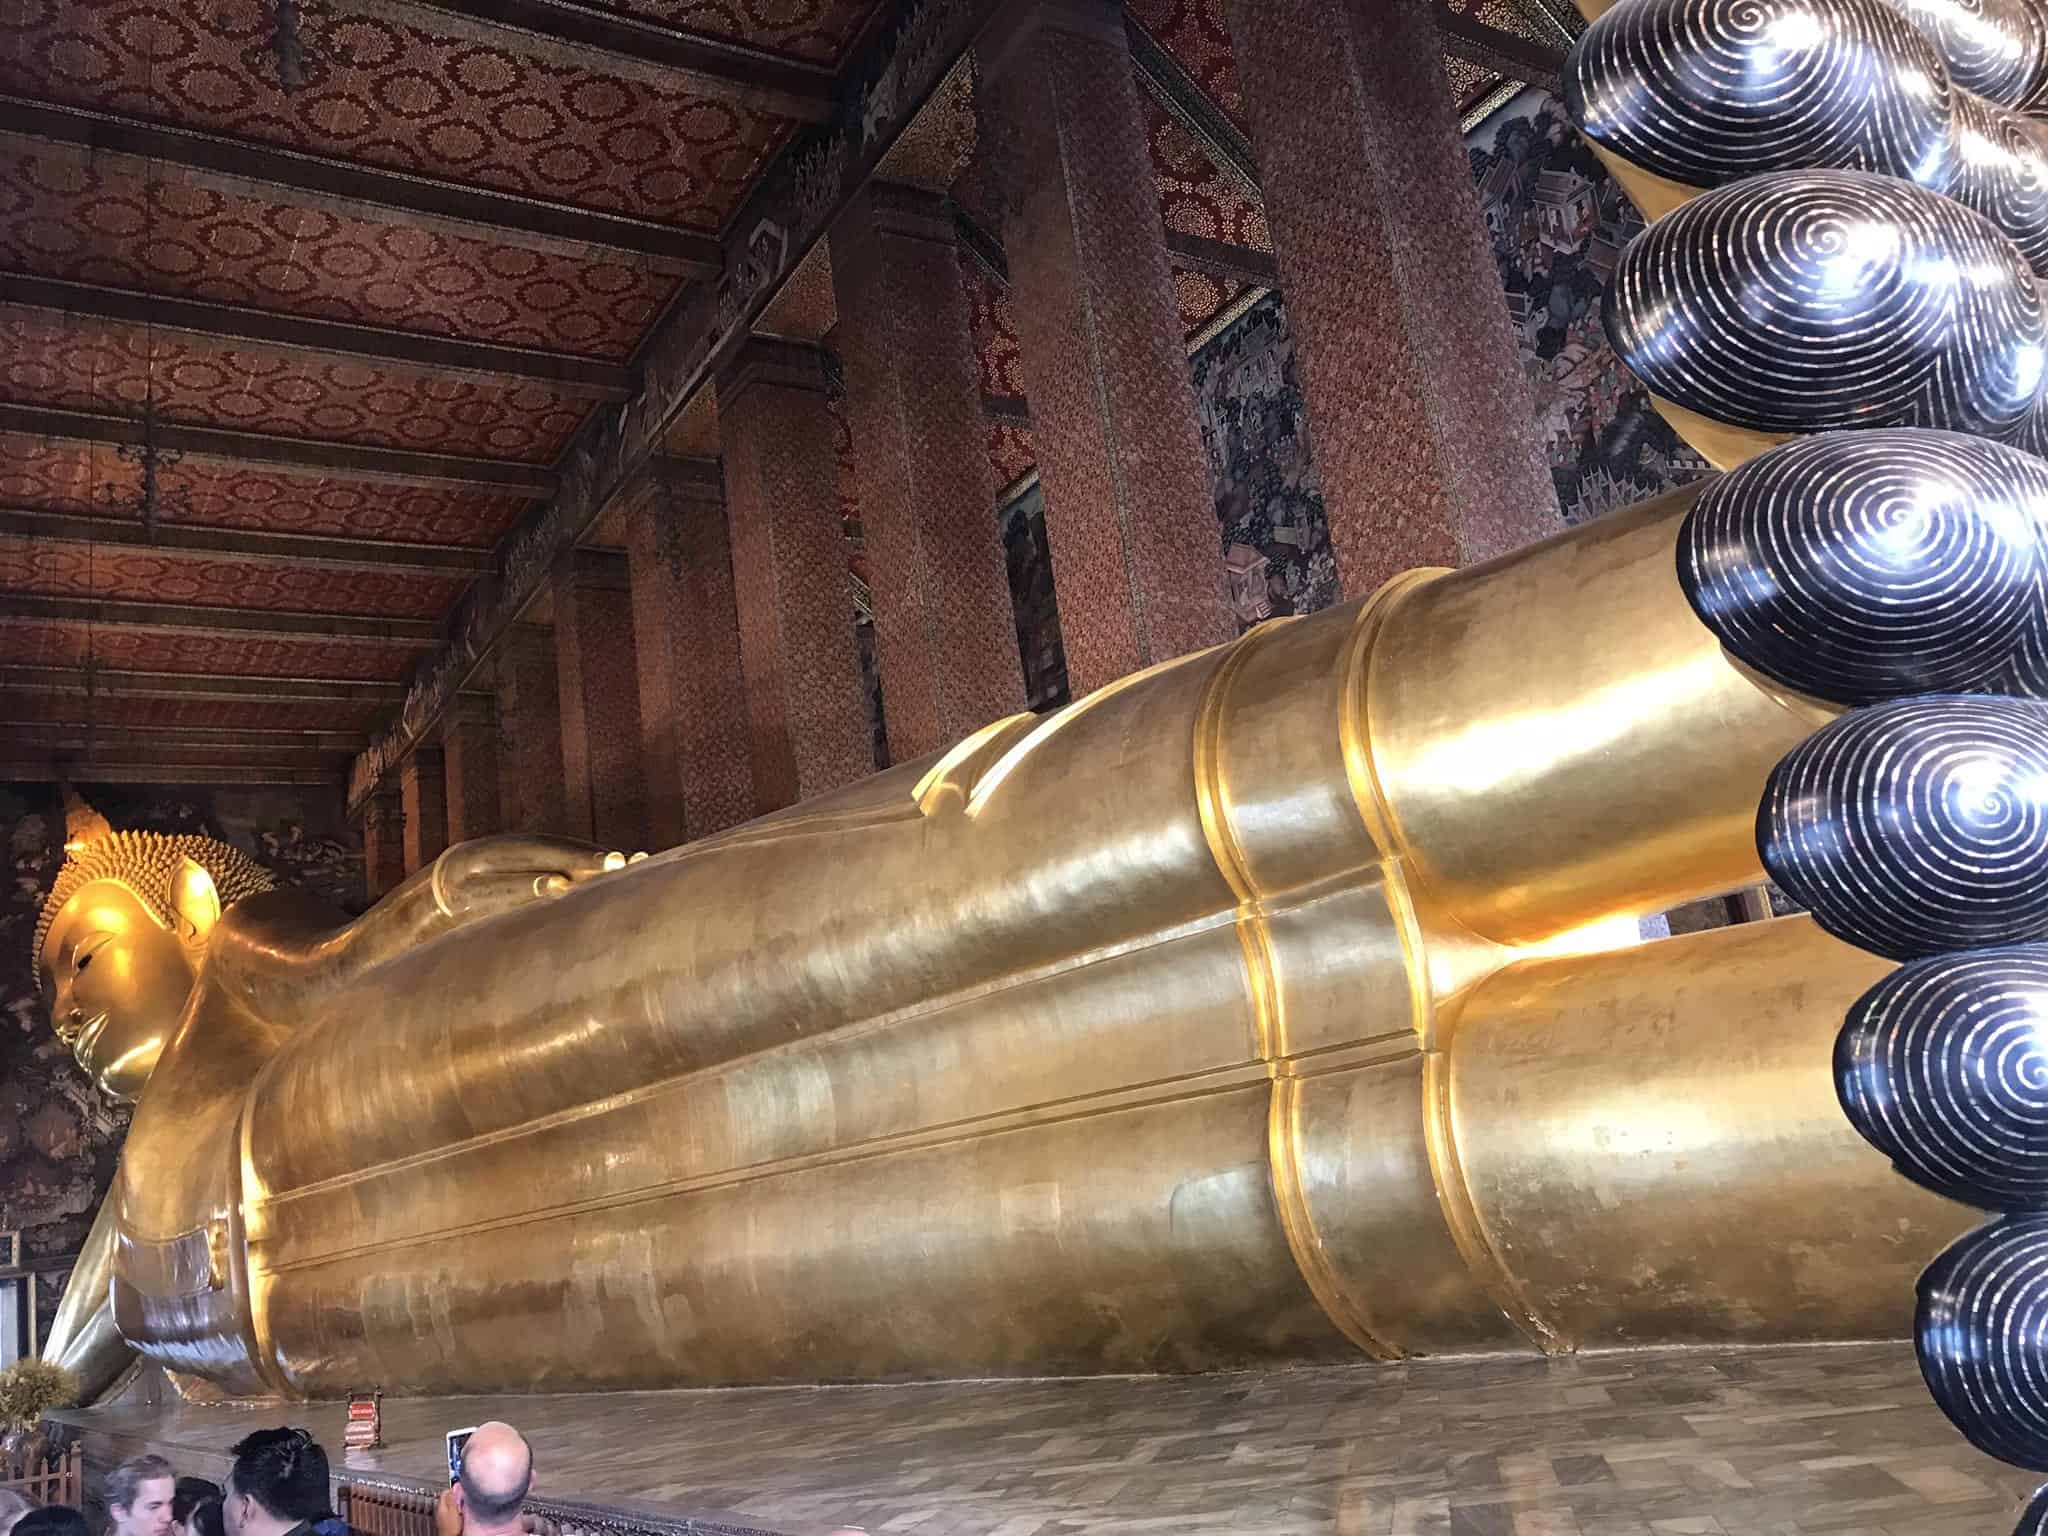 Thailand Travel Guide - Wat Pho